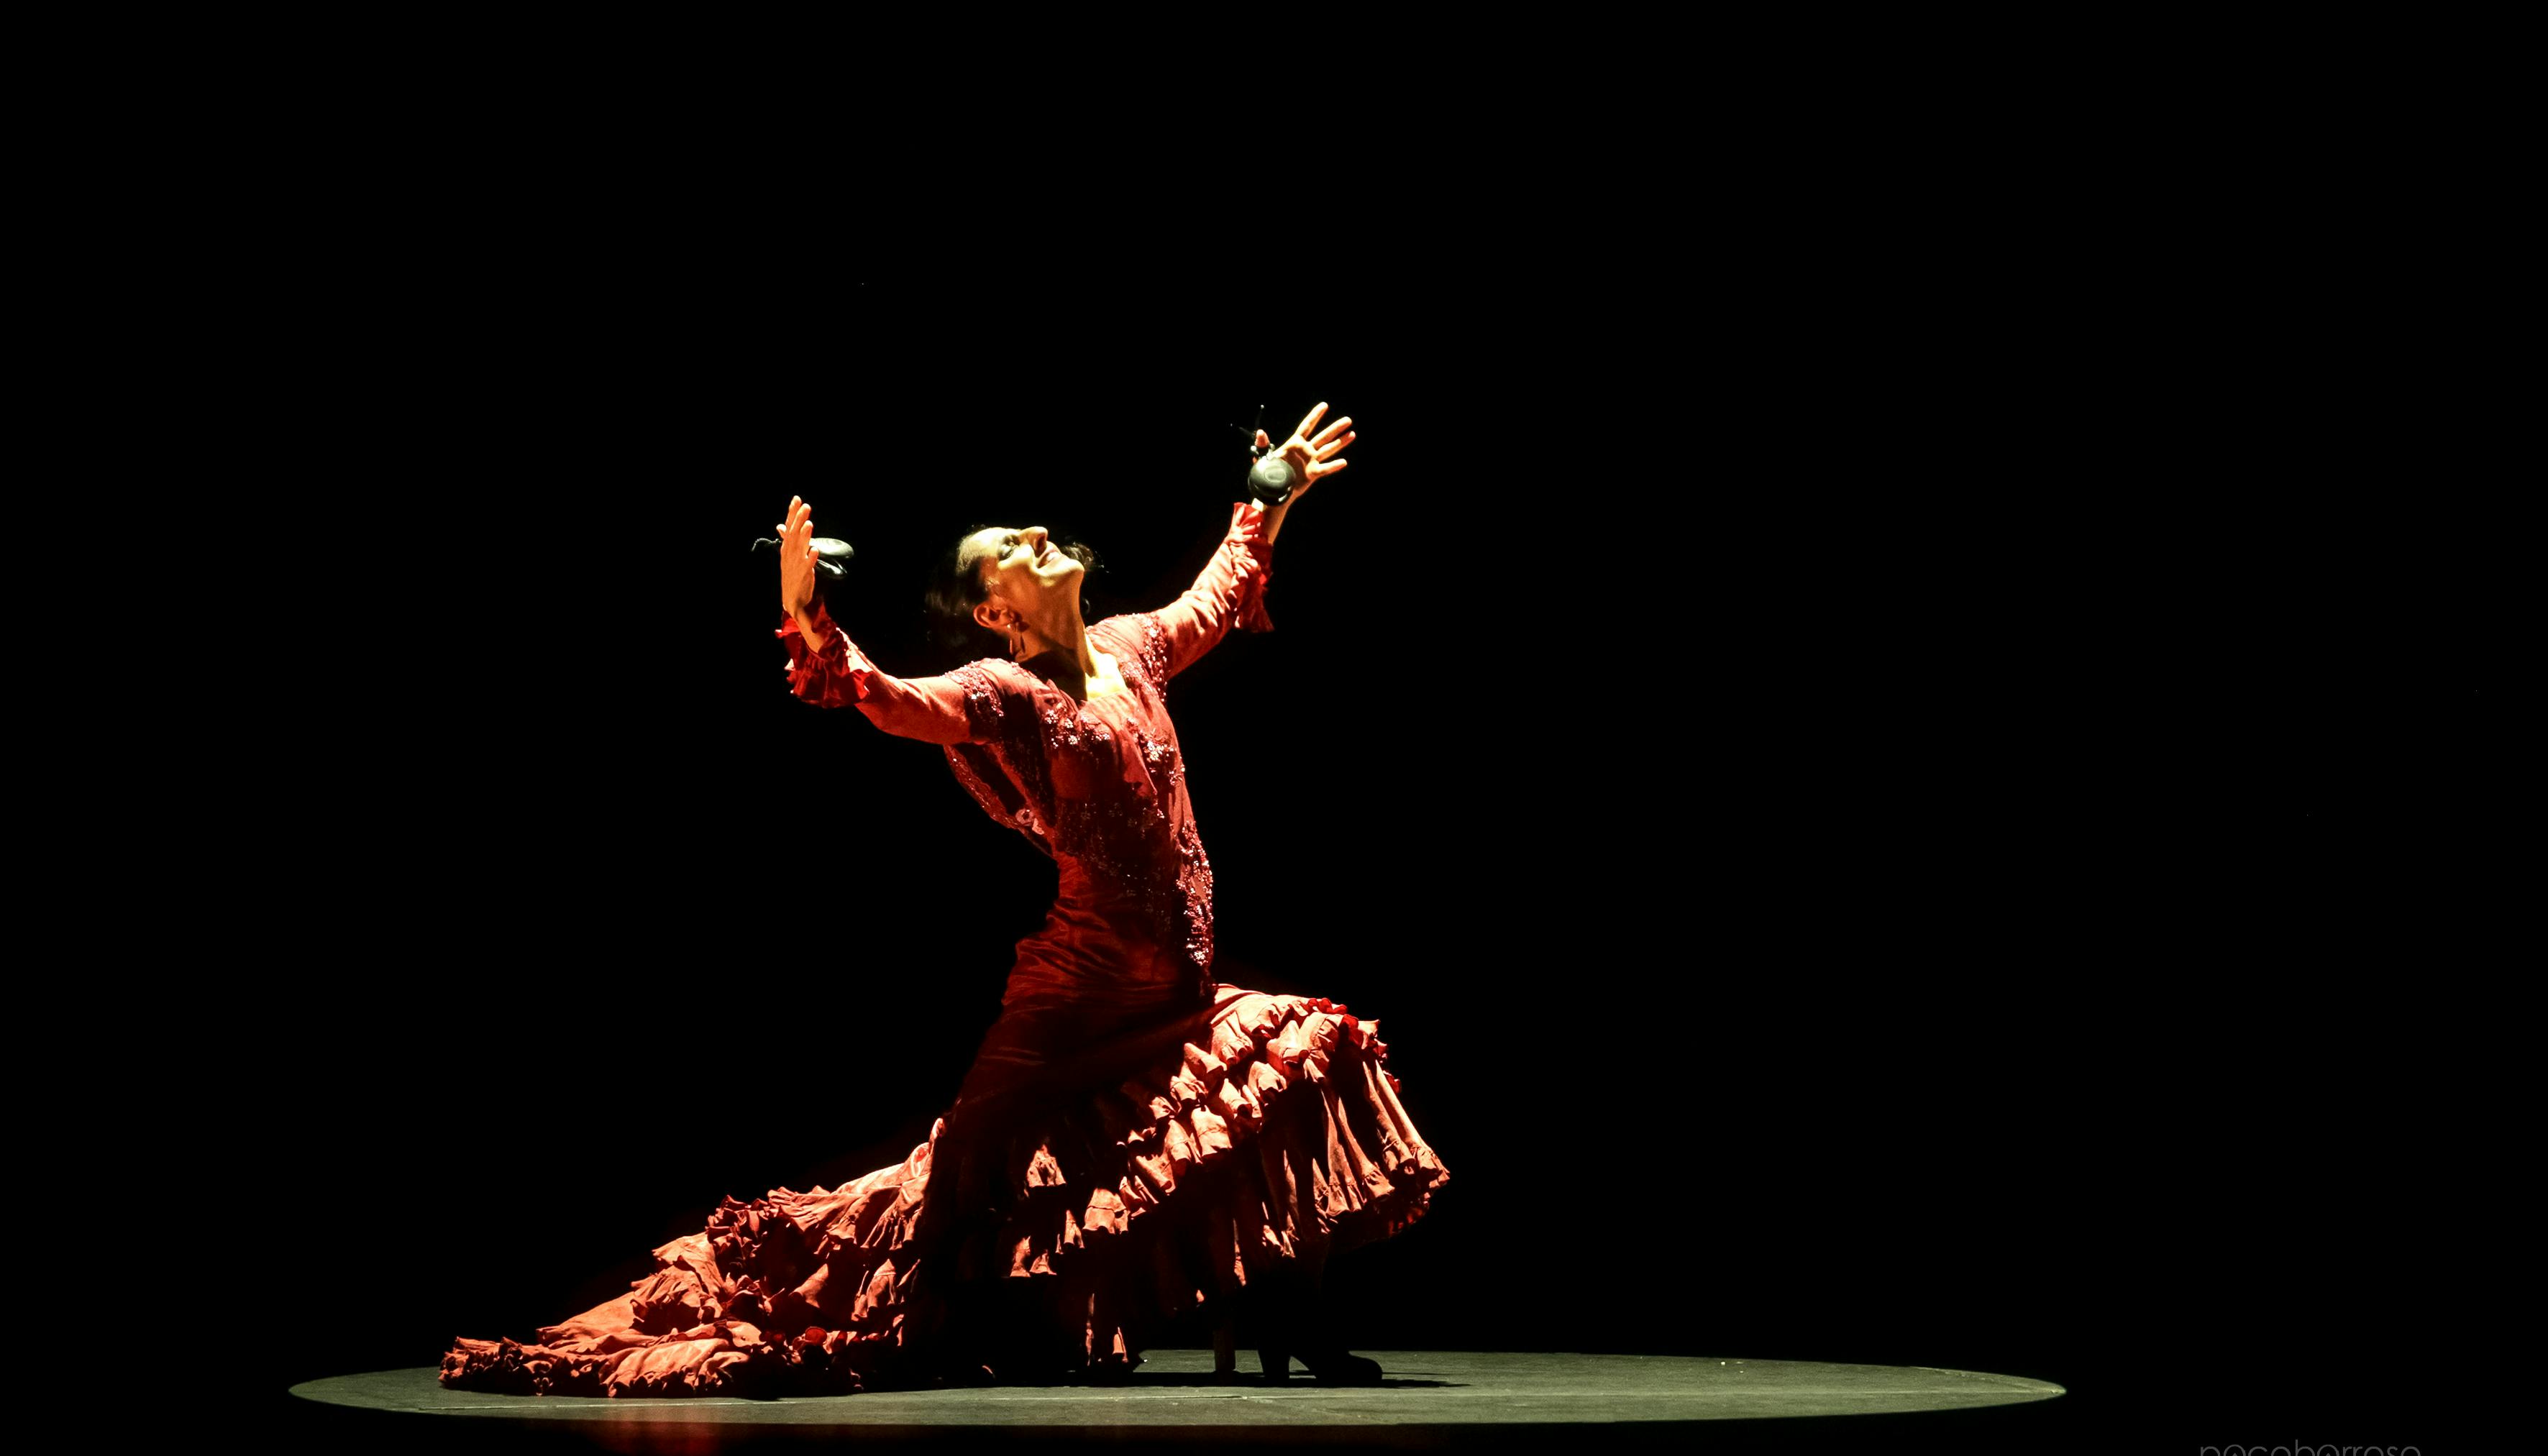 Mercedes Ruiz on stage with castanets in hand in an upwardly open position